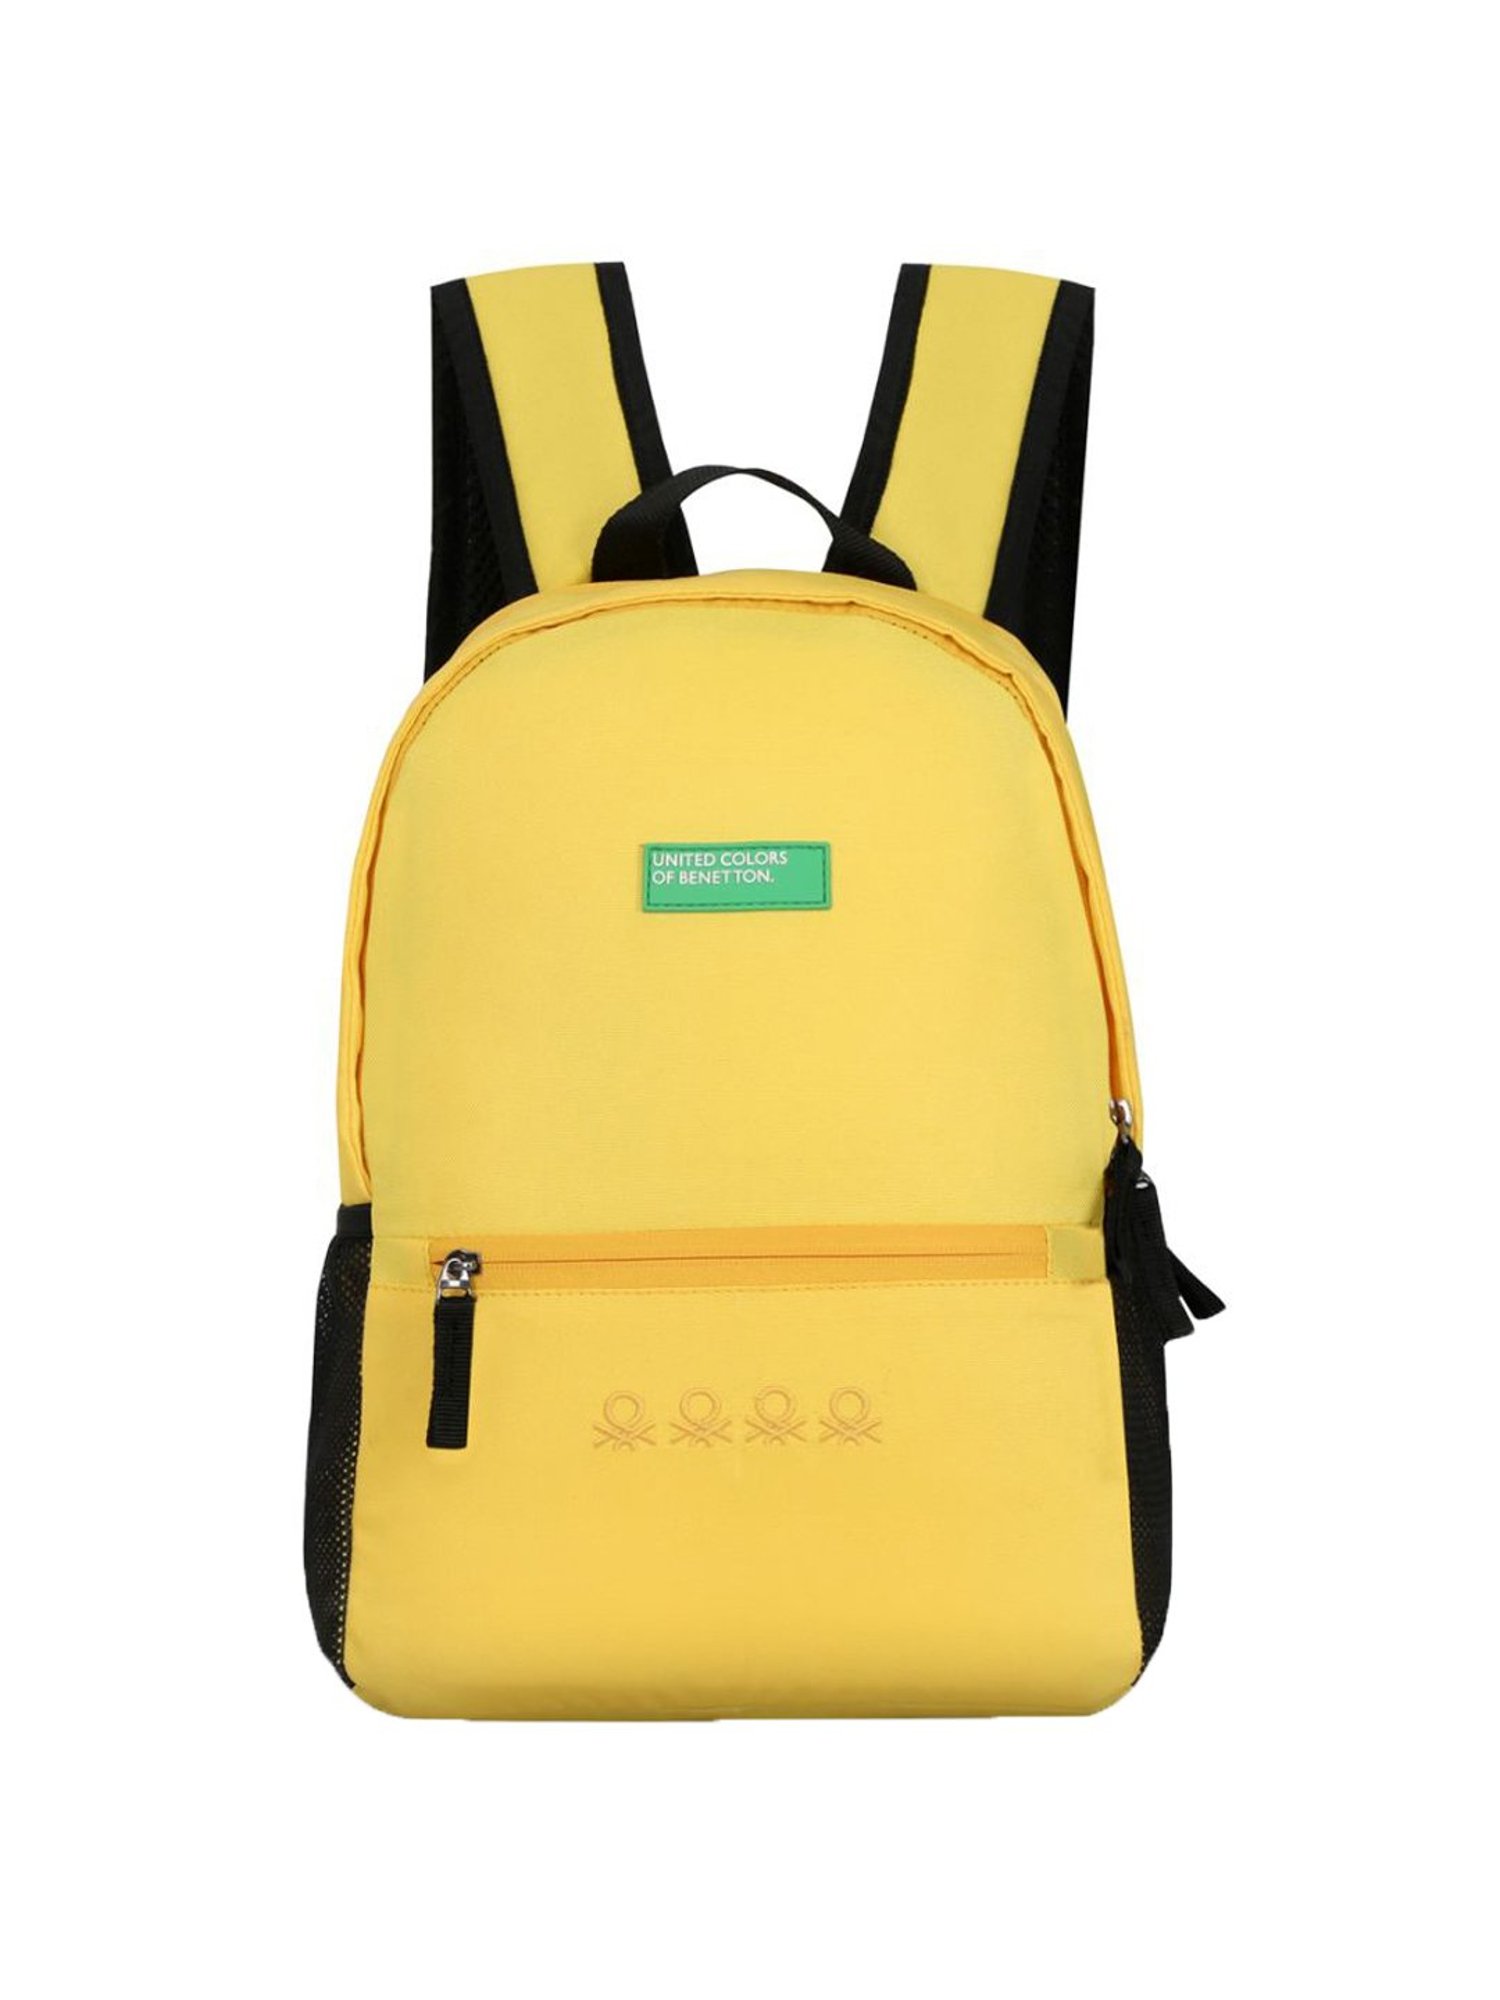 Buy Mini Backpack Purse for Women Teen Girls Small Fashion Bag, Yellow at  Amazon.in